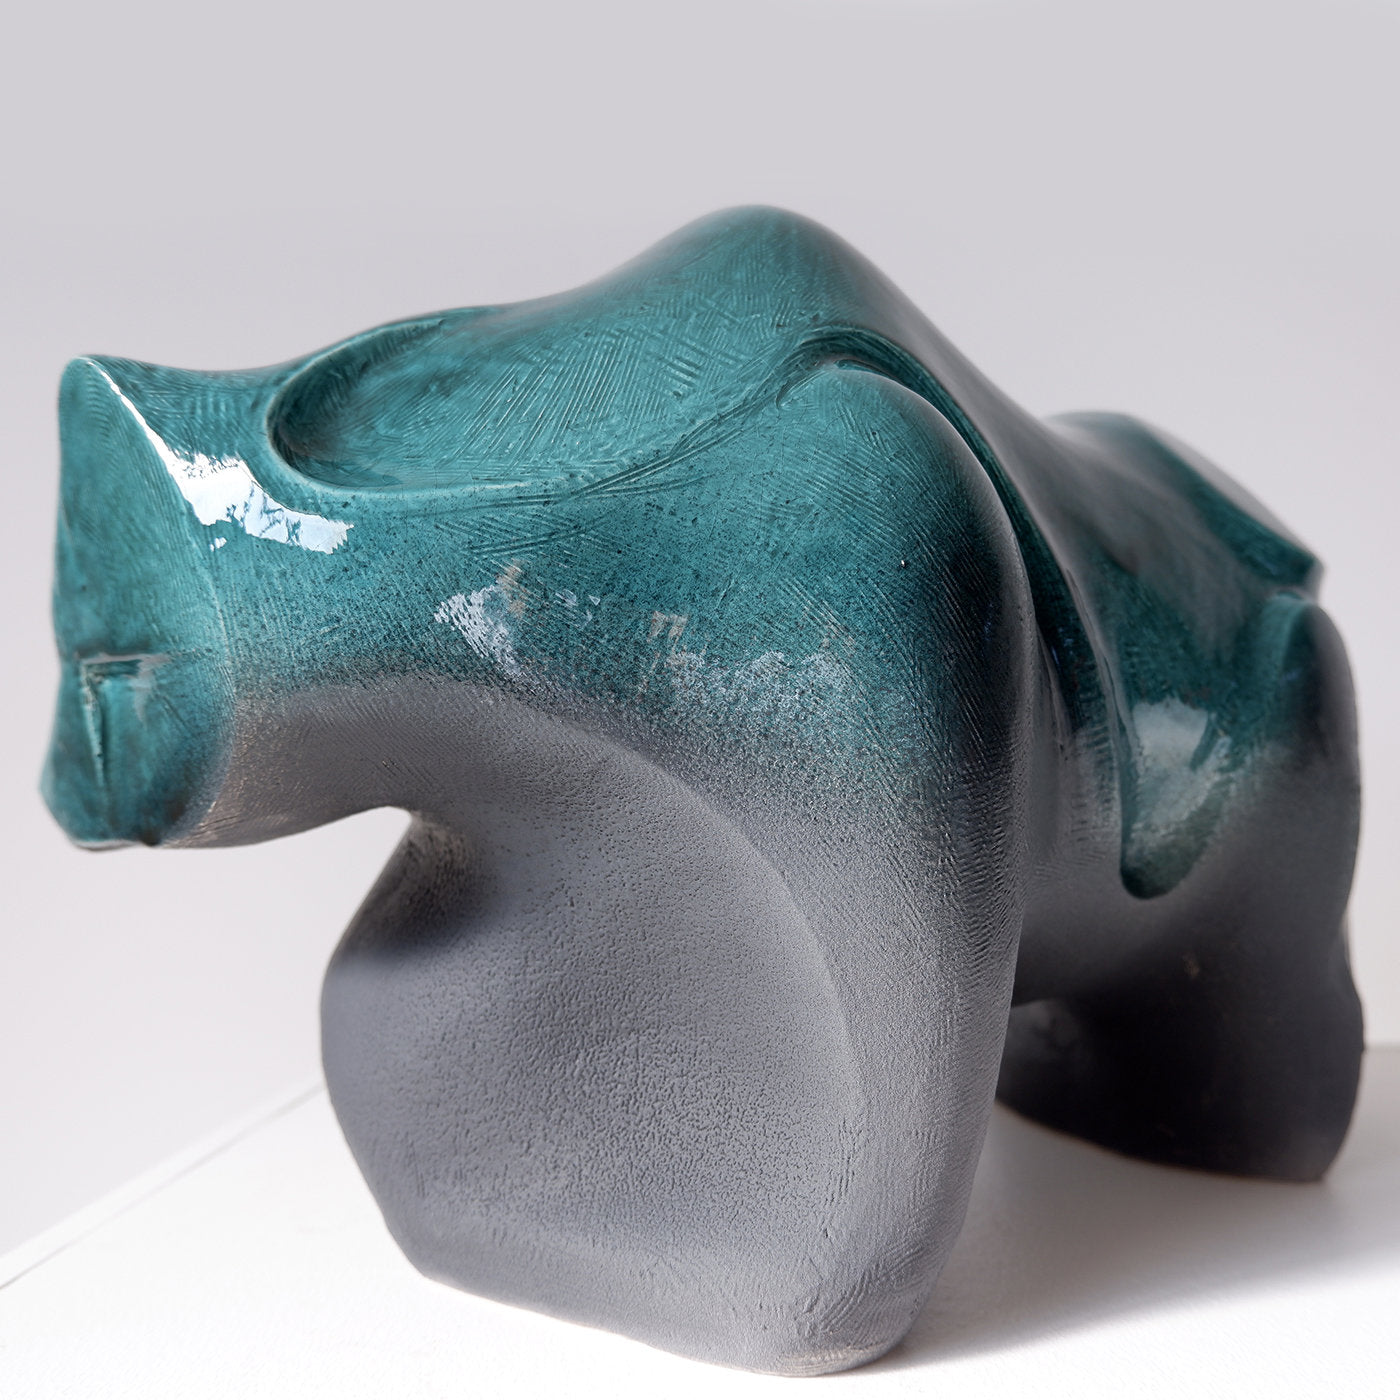 Bear Sculpture in Turquoise - Alternative view 2